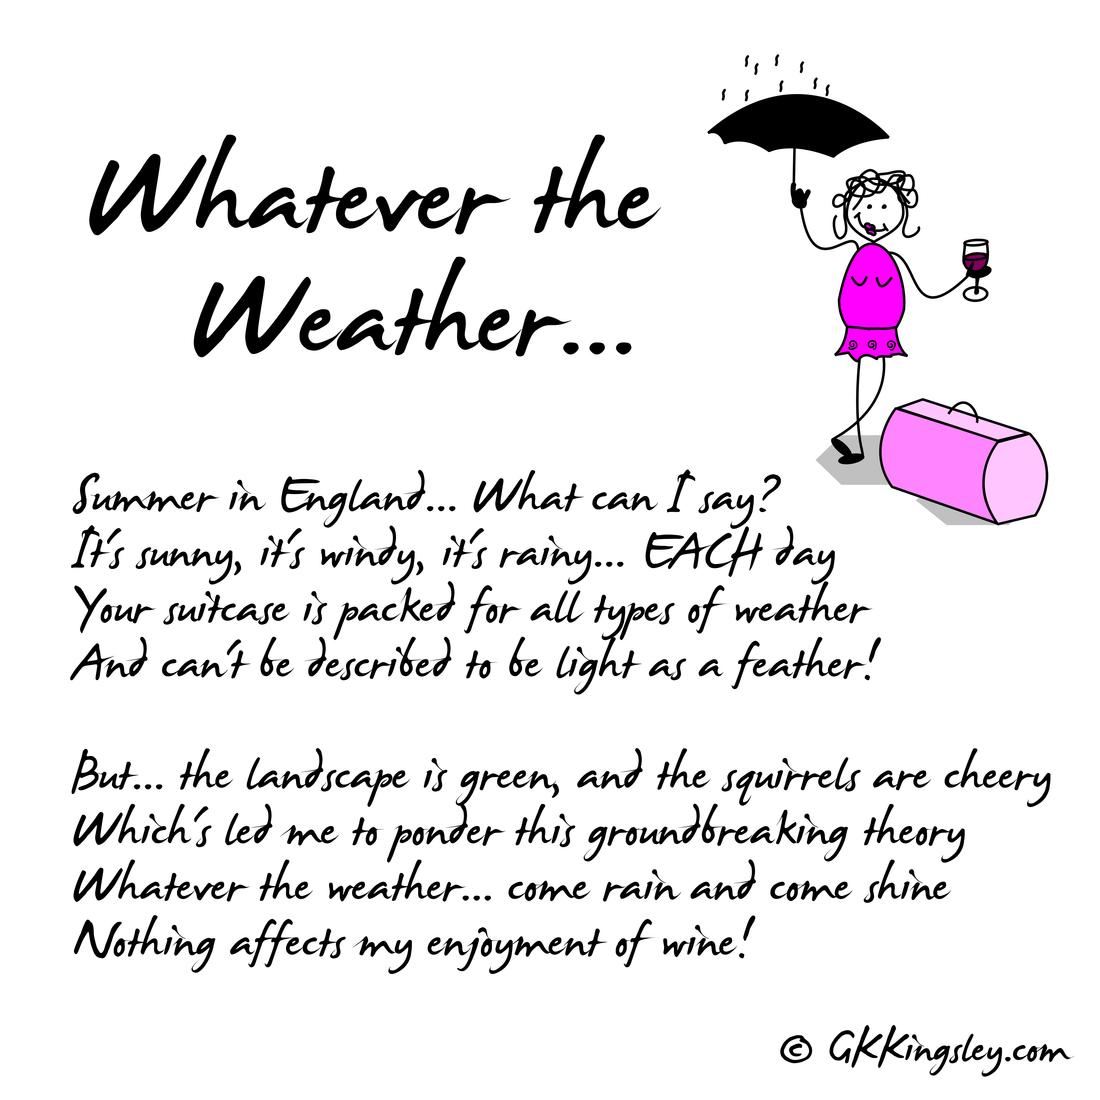 I have a theory that whatever the weather...